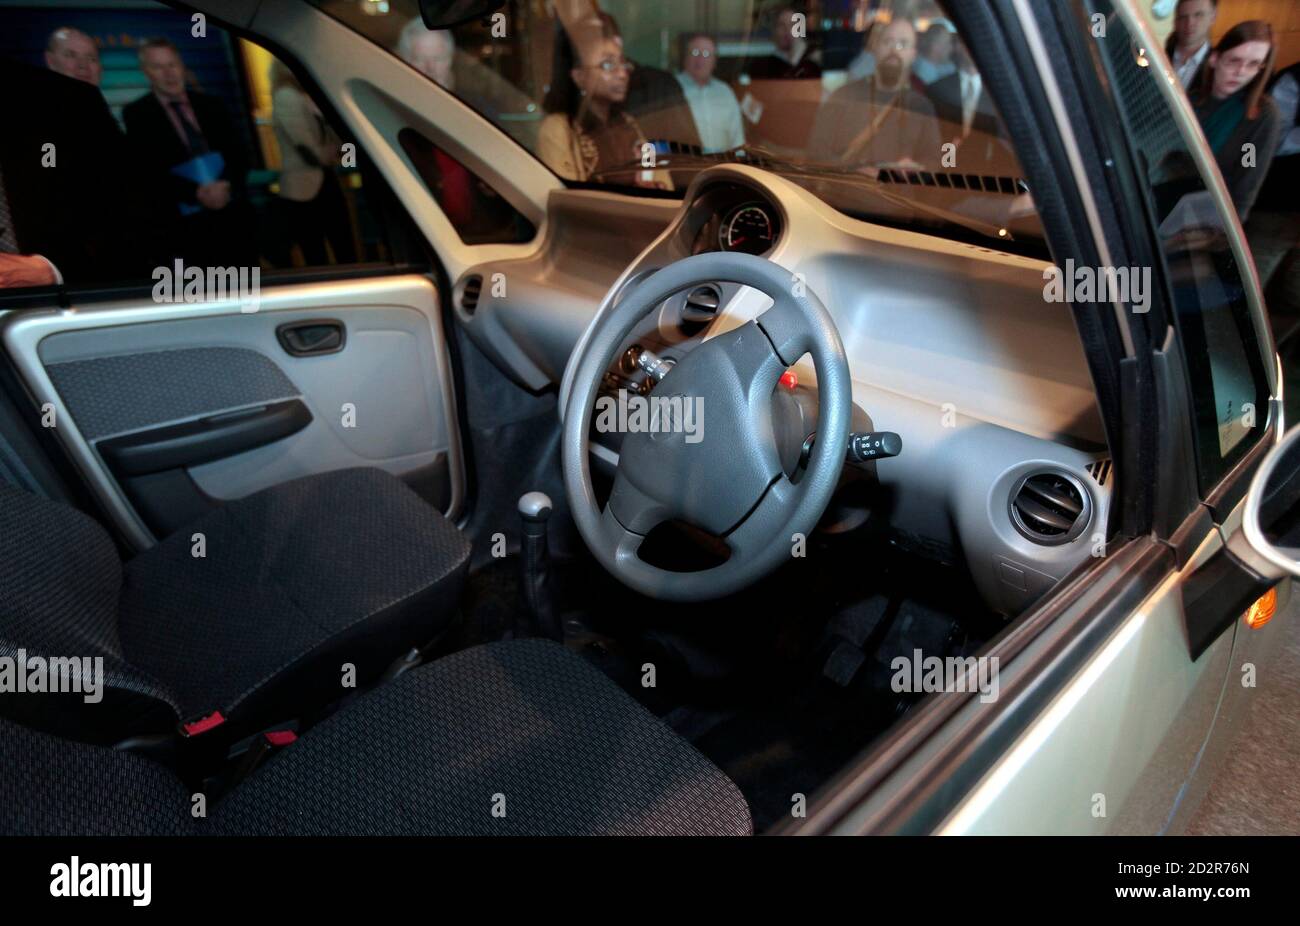 The interior of the Tata Nano is seen as the vehicle is displayed for the first time in the U.S. at the Science Center in Detroit, Michigan January 14, 2010. Unveiled last year in India by Tata Motors, the Tata Nano is targeted to families who have not previously been able to afford a car. REUTERS/Rebecca Cook  (UNITED STATES - Tags: TRANSPORT BUSINESS) Stock Photo